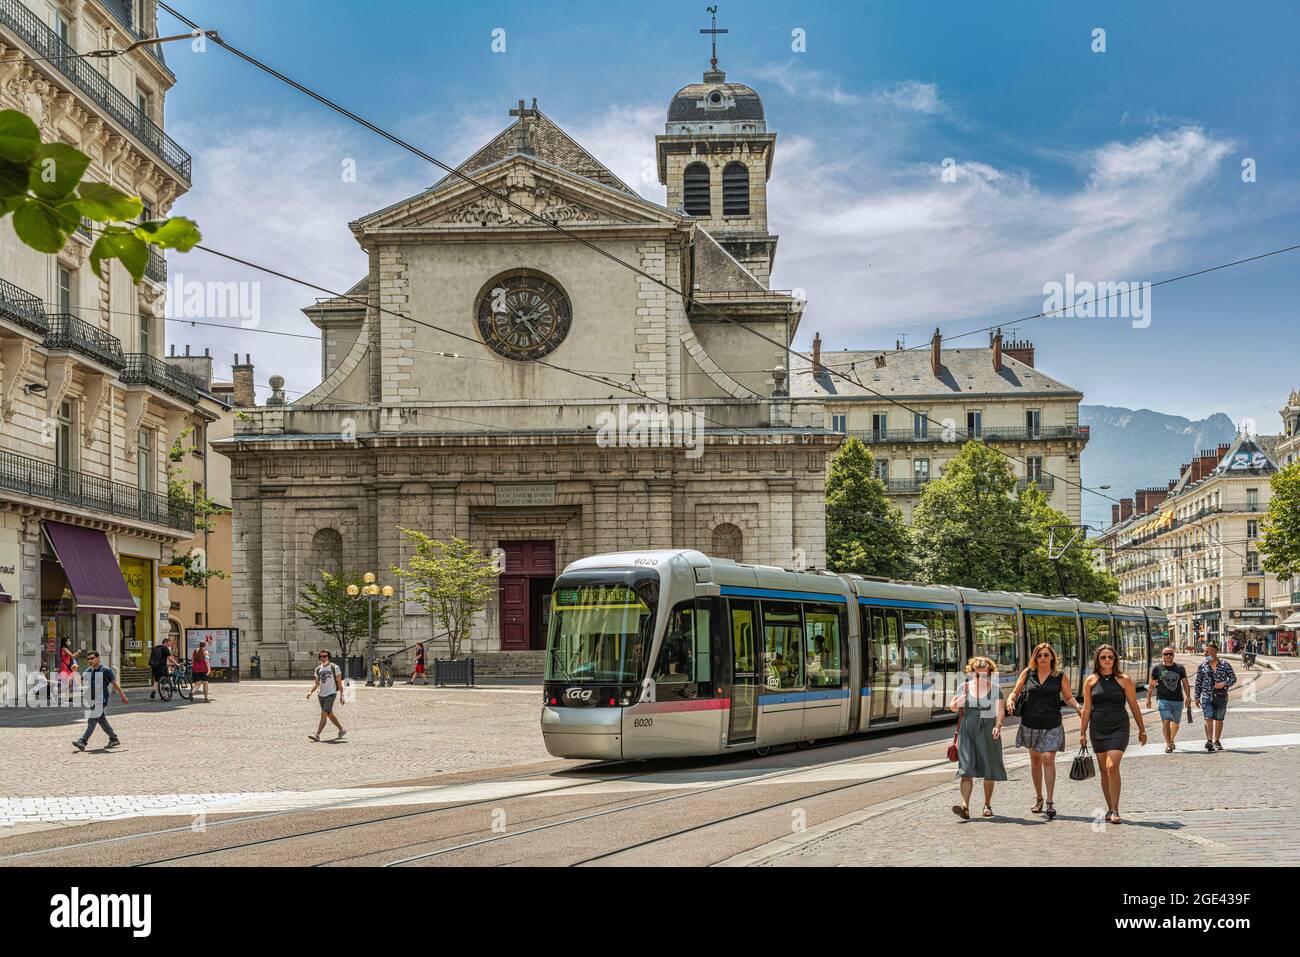 Tourists stroll past the Saint Louis church on Rue Félix Poulat in Grenoble on a sunny summer day. Grenoble, France Stock Photo